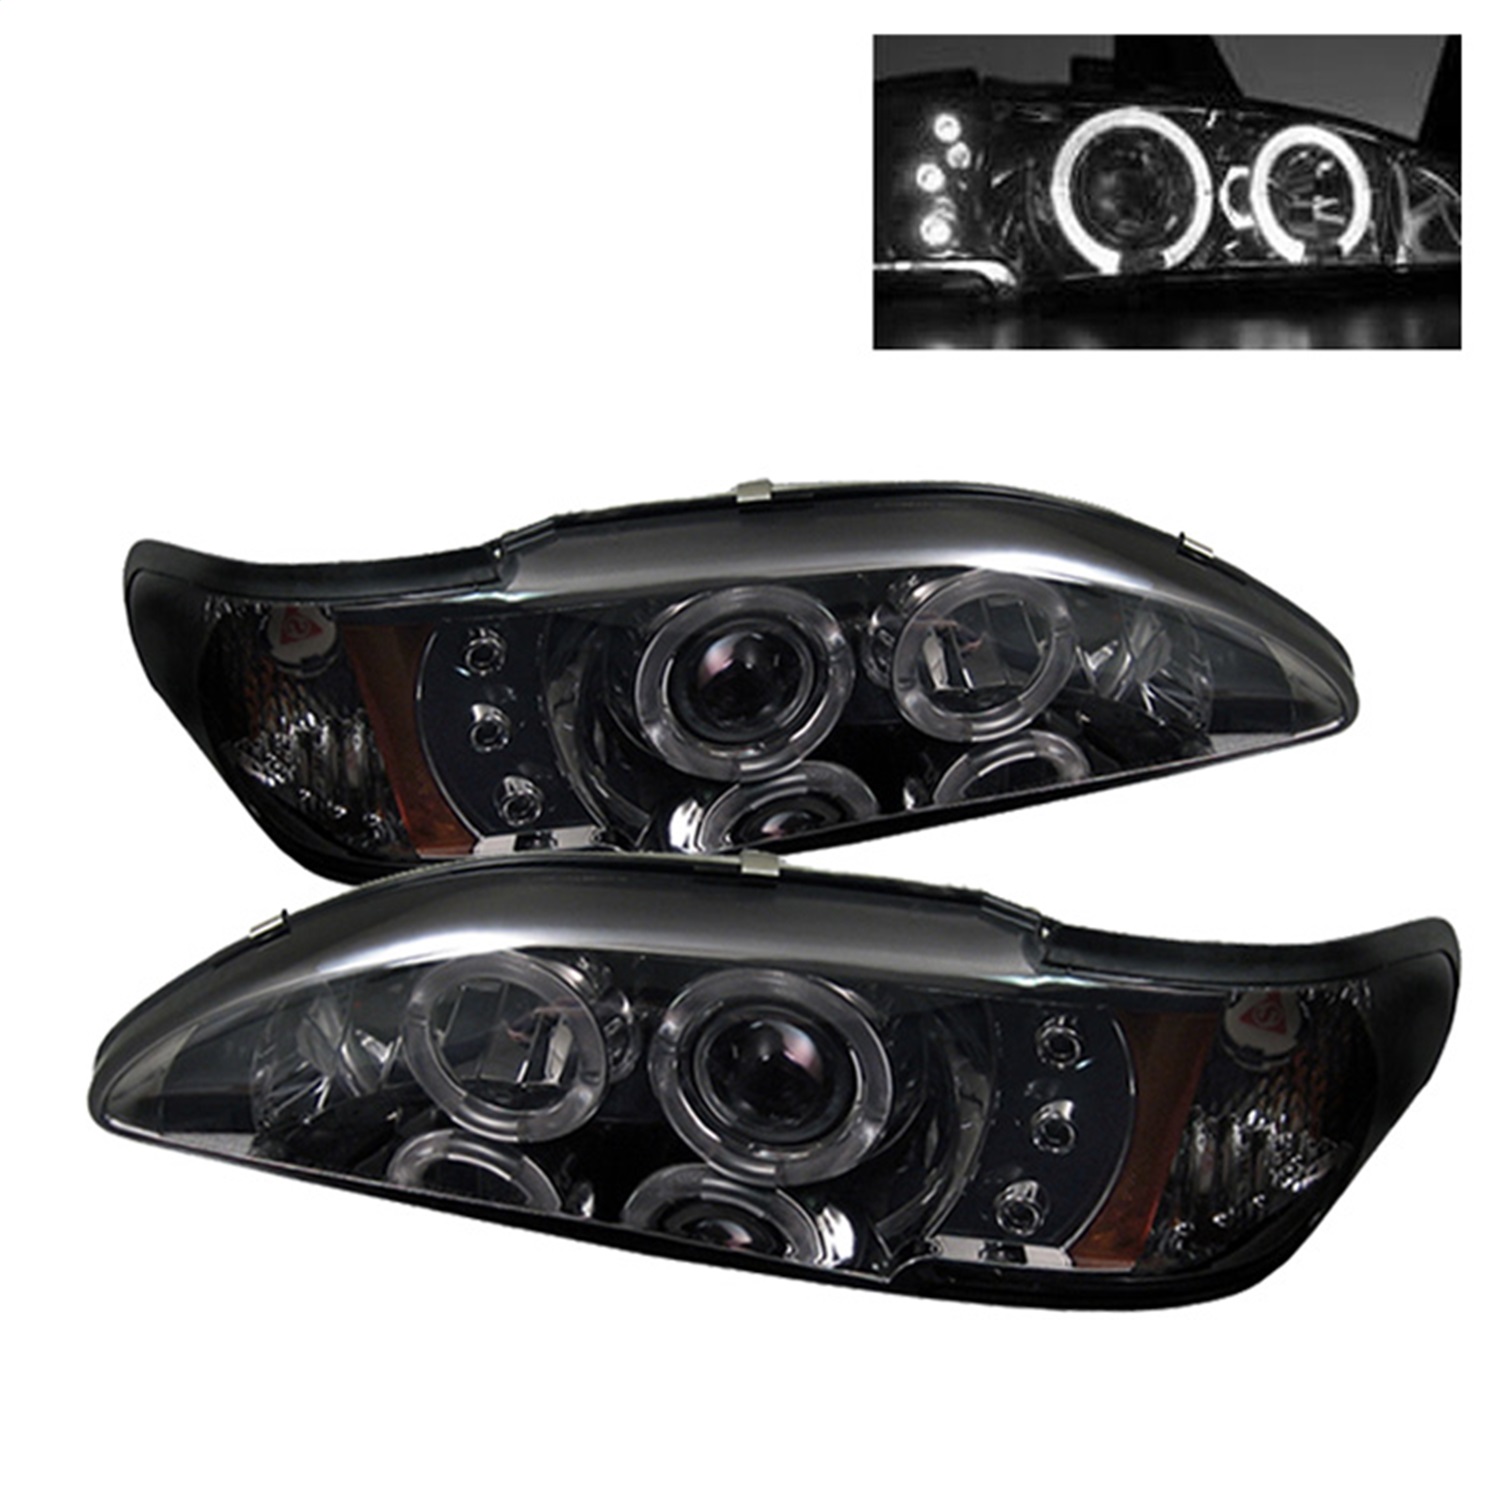 Spyder Auto 5010414 Halo LED Projector Headlights Fits 94-98 Mustang